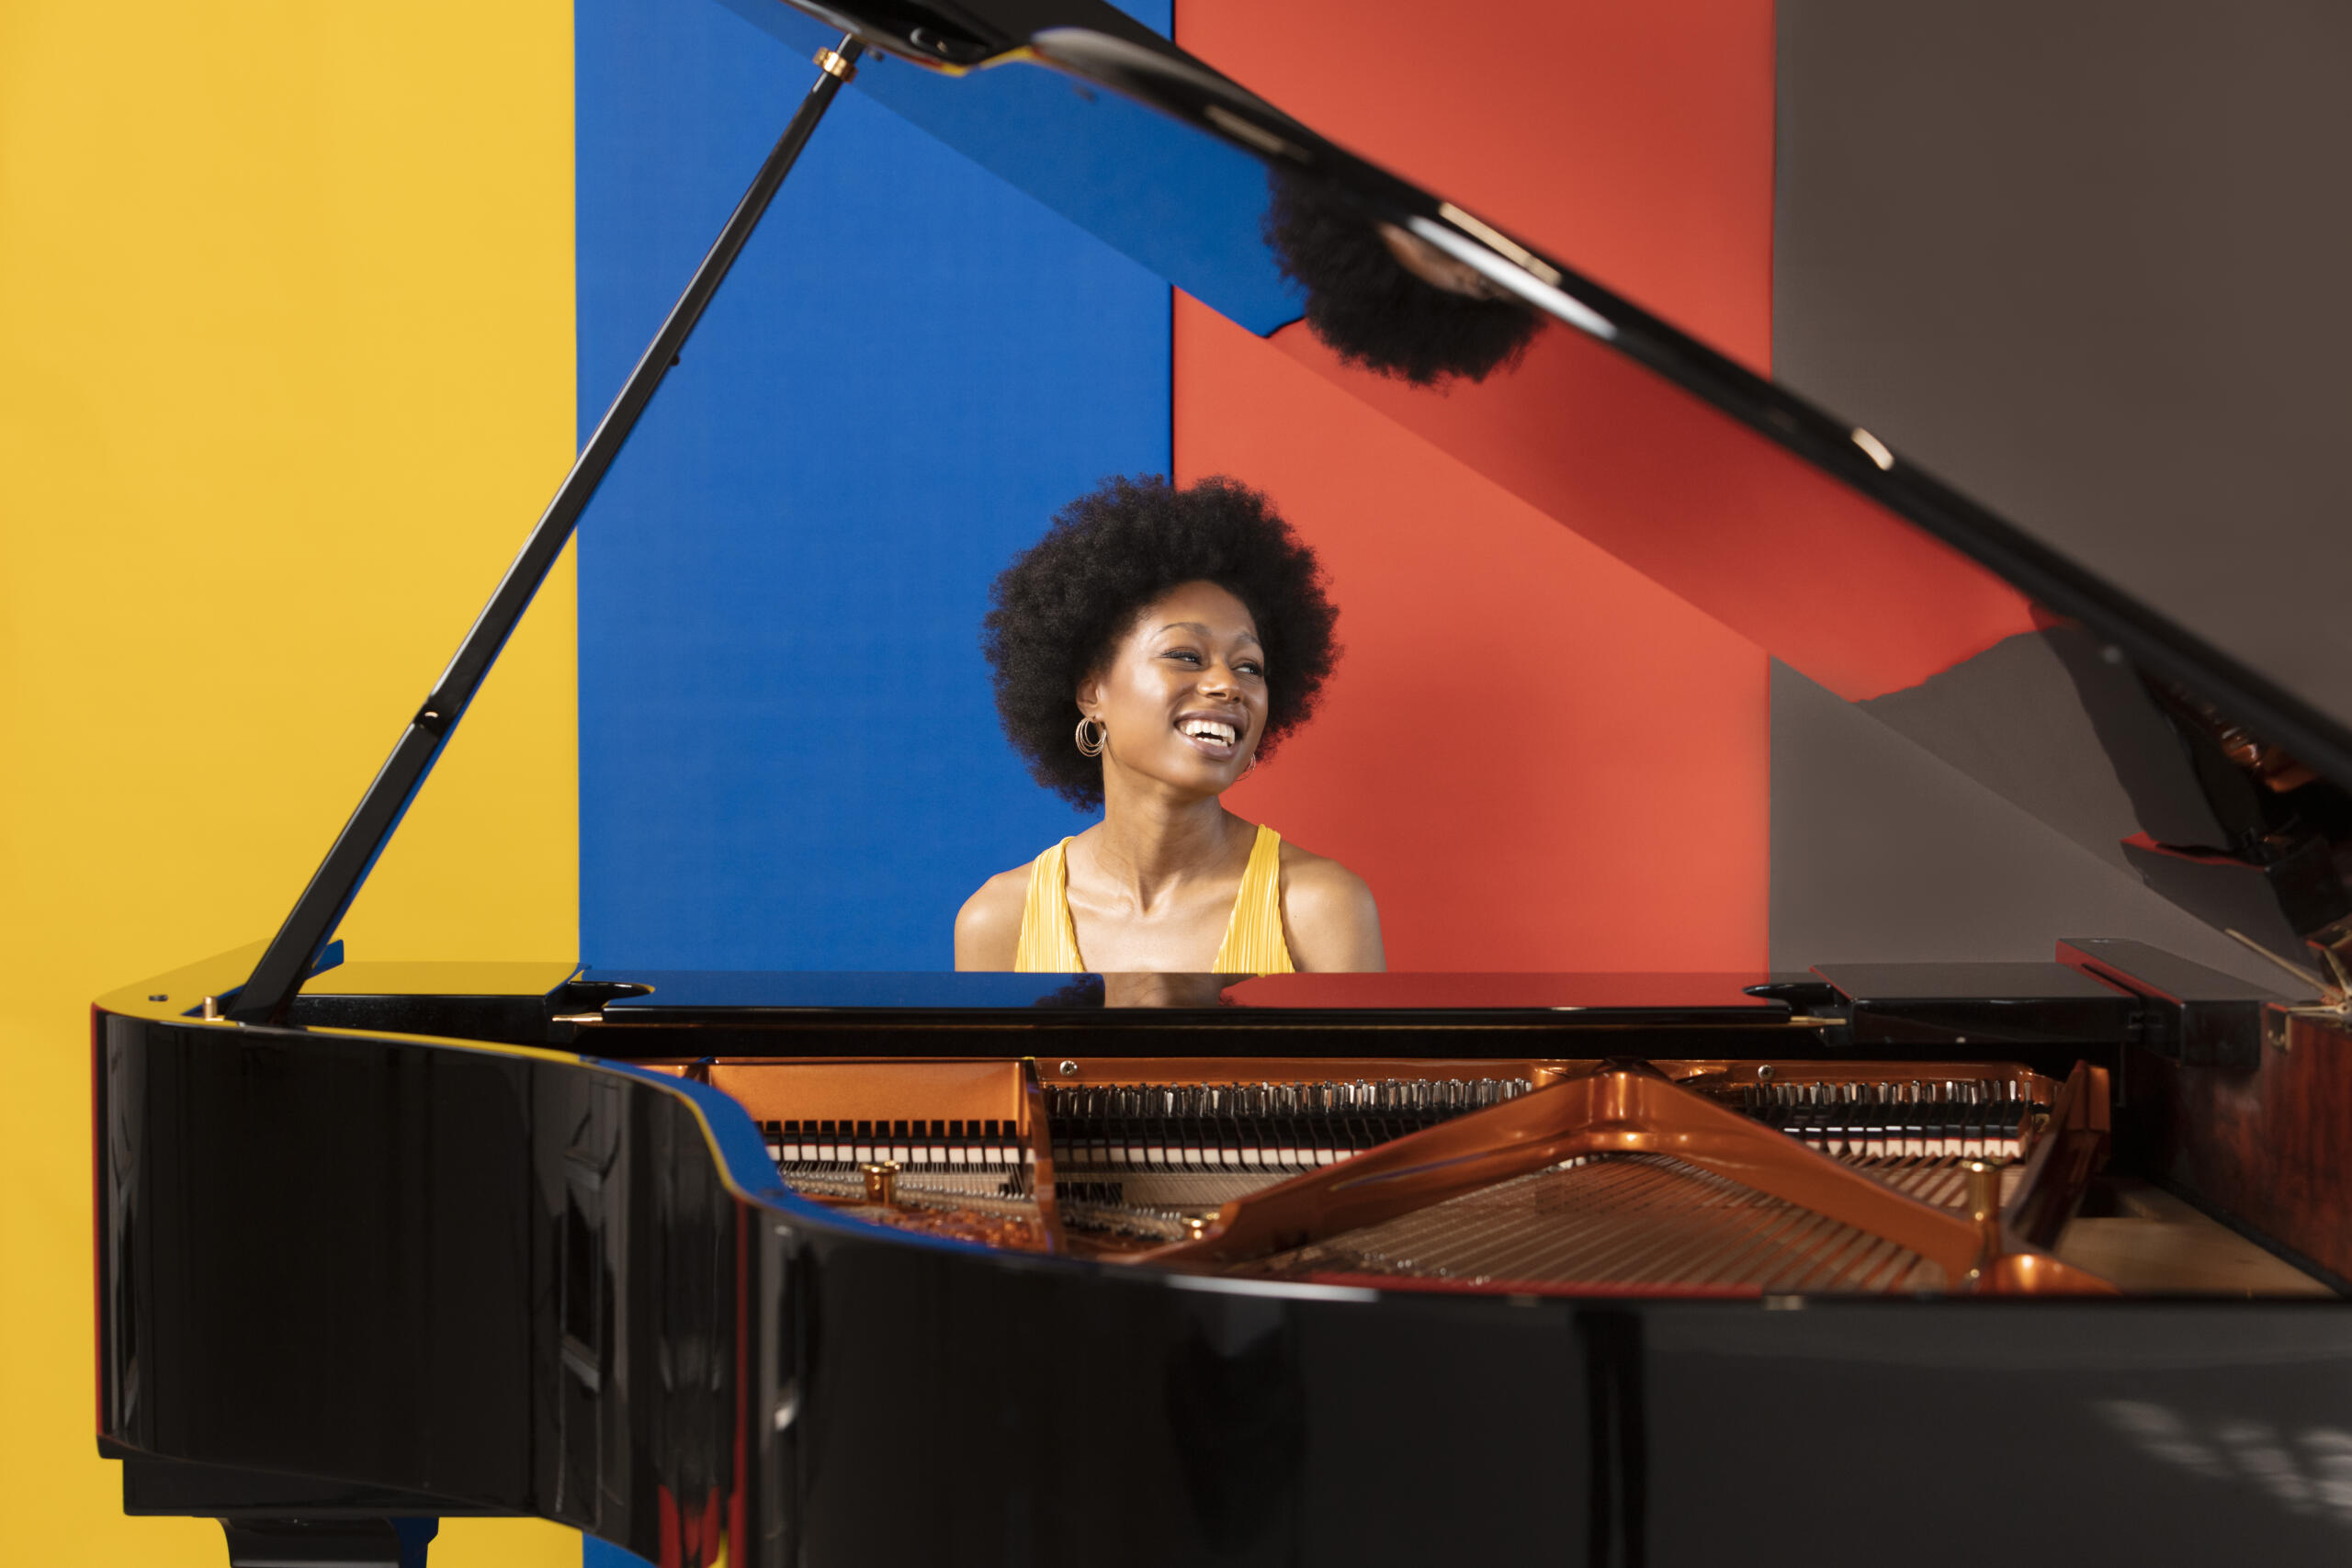 Portrait of the pianist Isata Kanneh-Mason. She is sitting behind a grand piano in a yellow dress, laughing. The wall behind her is striped in yellow, blue, red and brown.